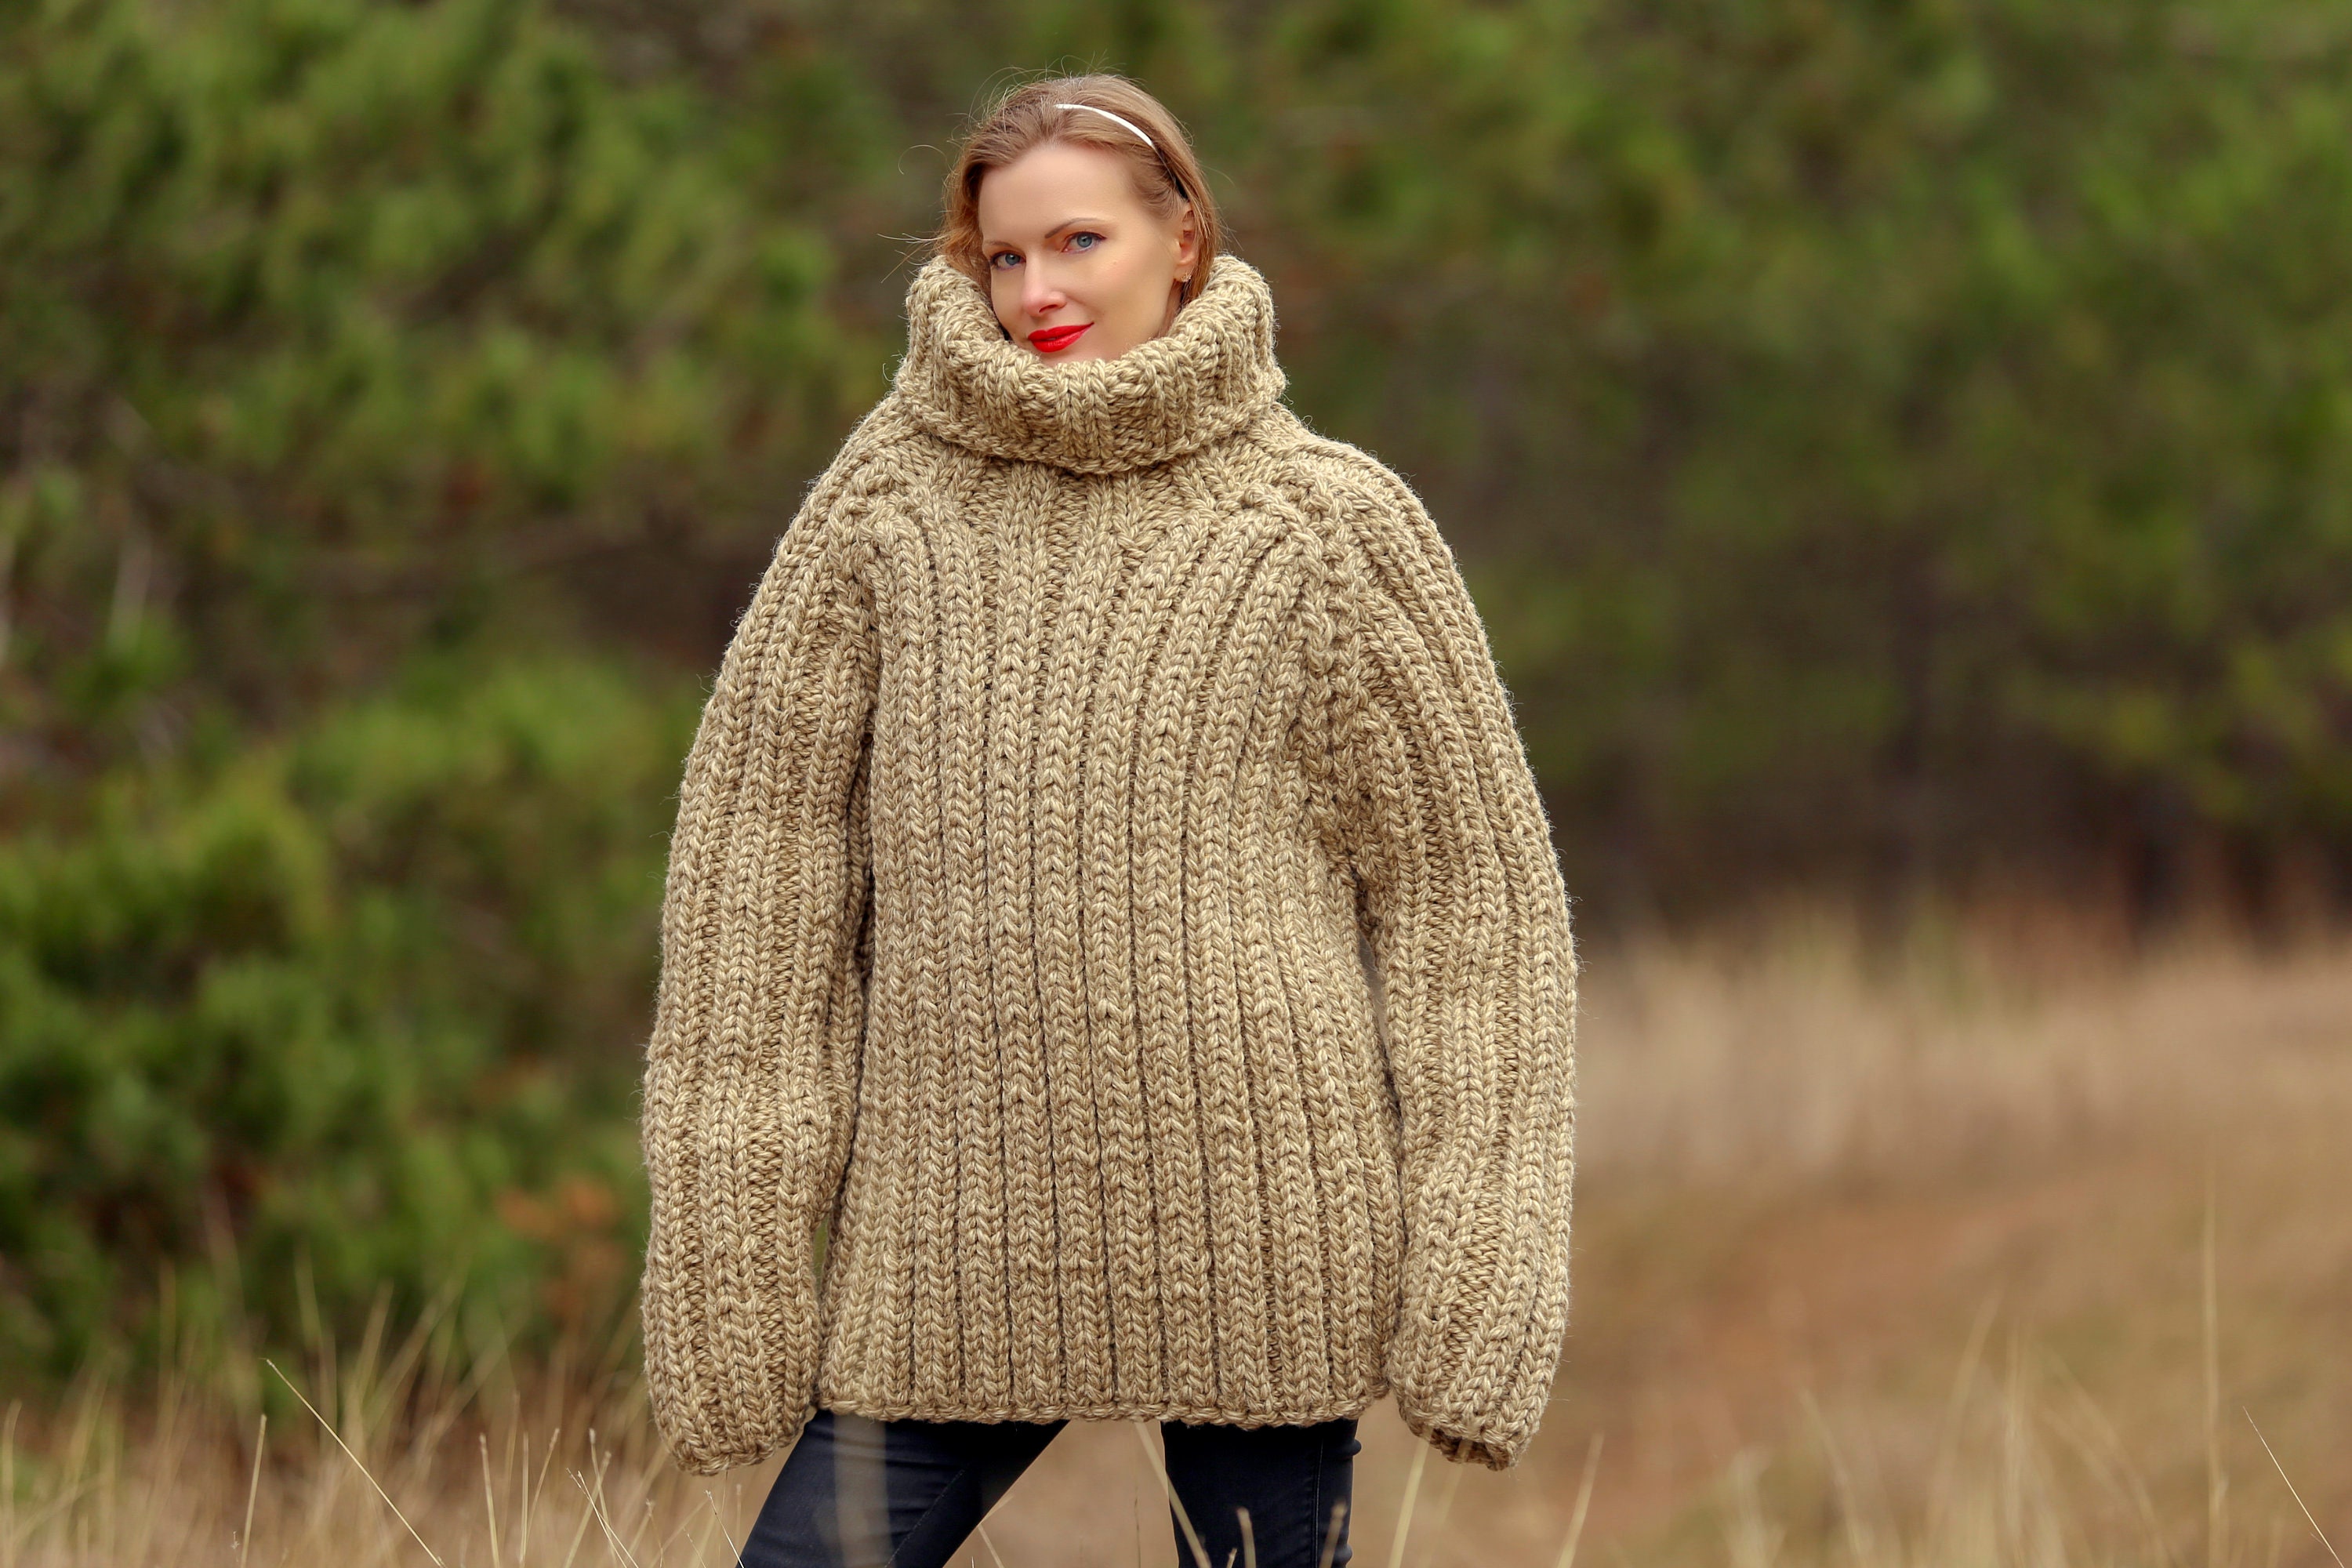 Supertanya Organic Wool Sweater Itchy Wool Pullover XXXL Size Ready to Ship  4.8 KG 100% Wool -  Canada